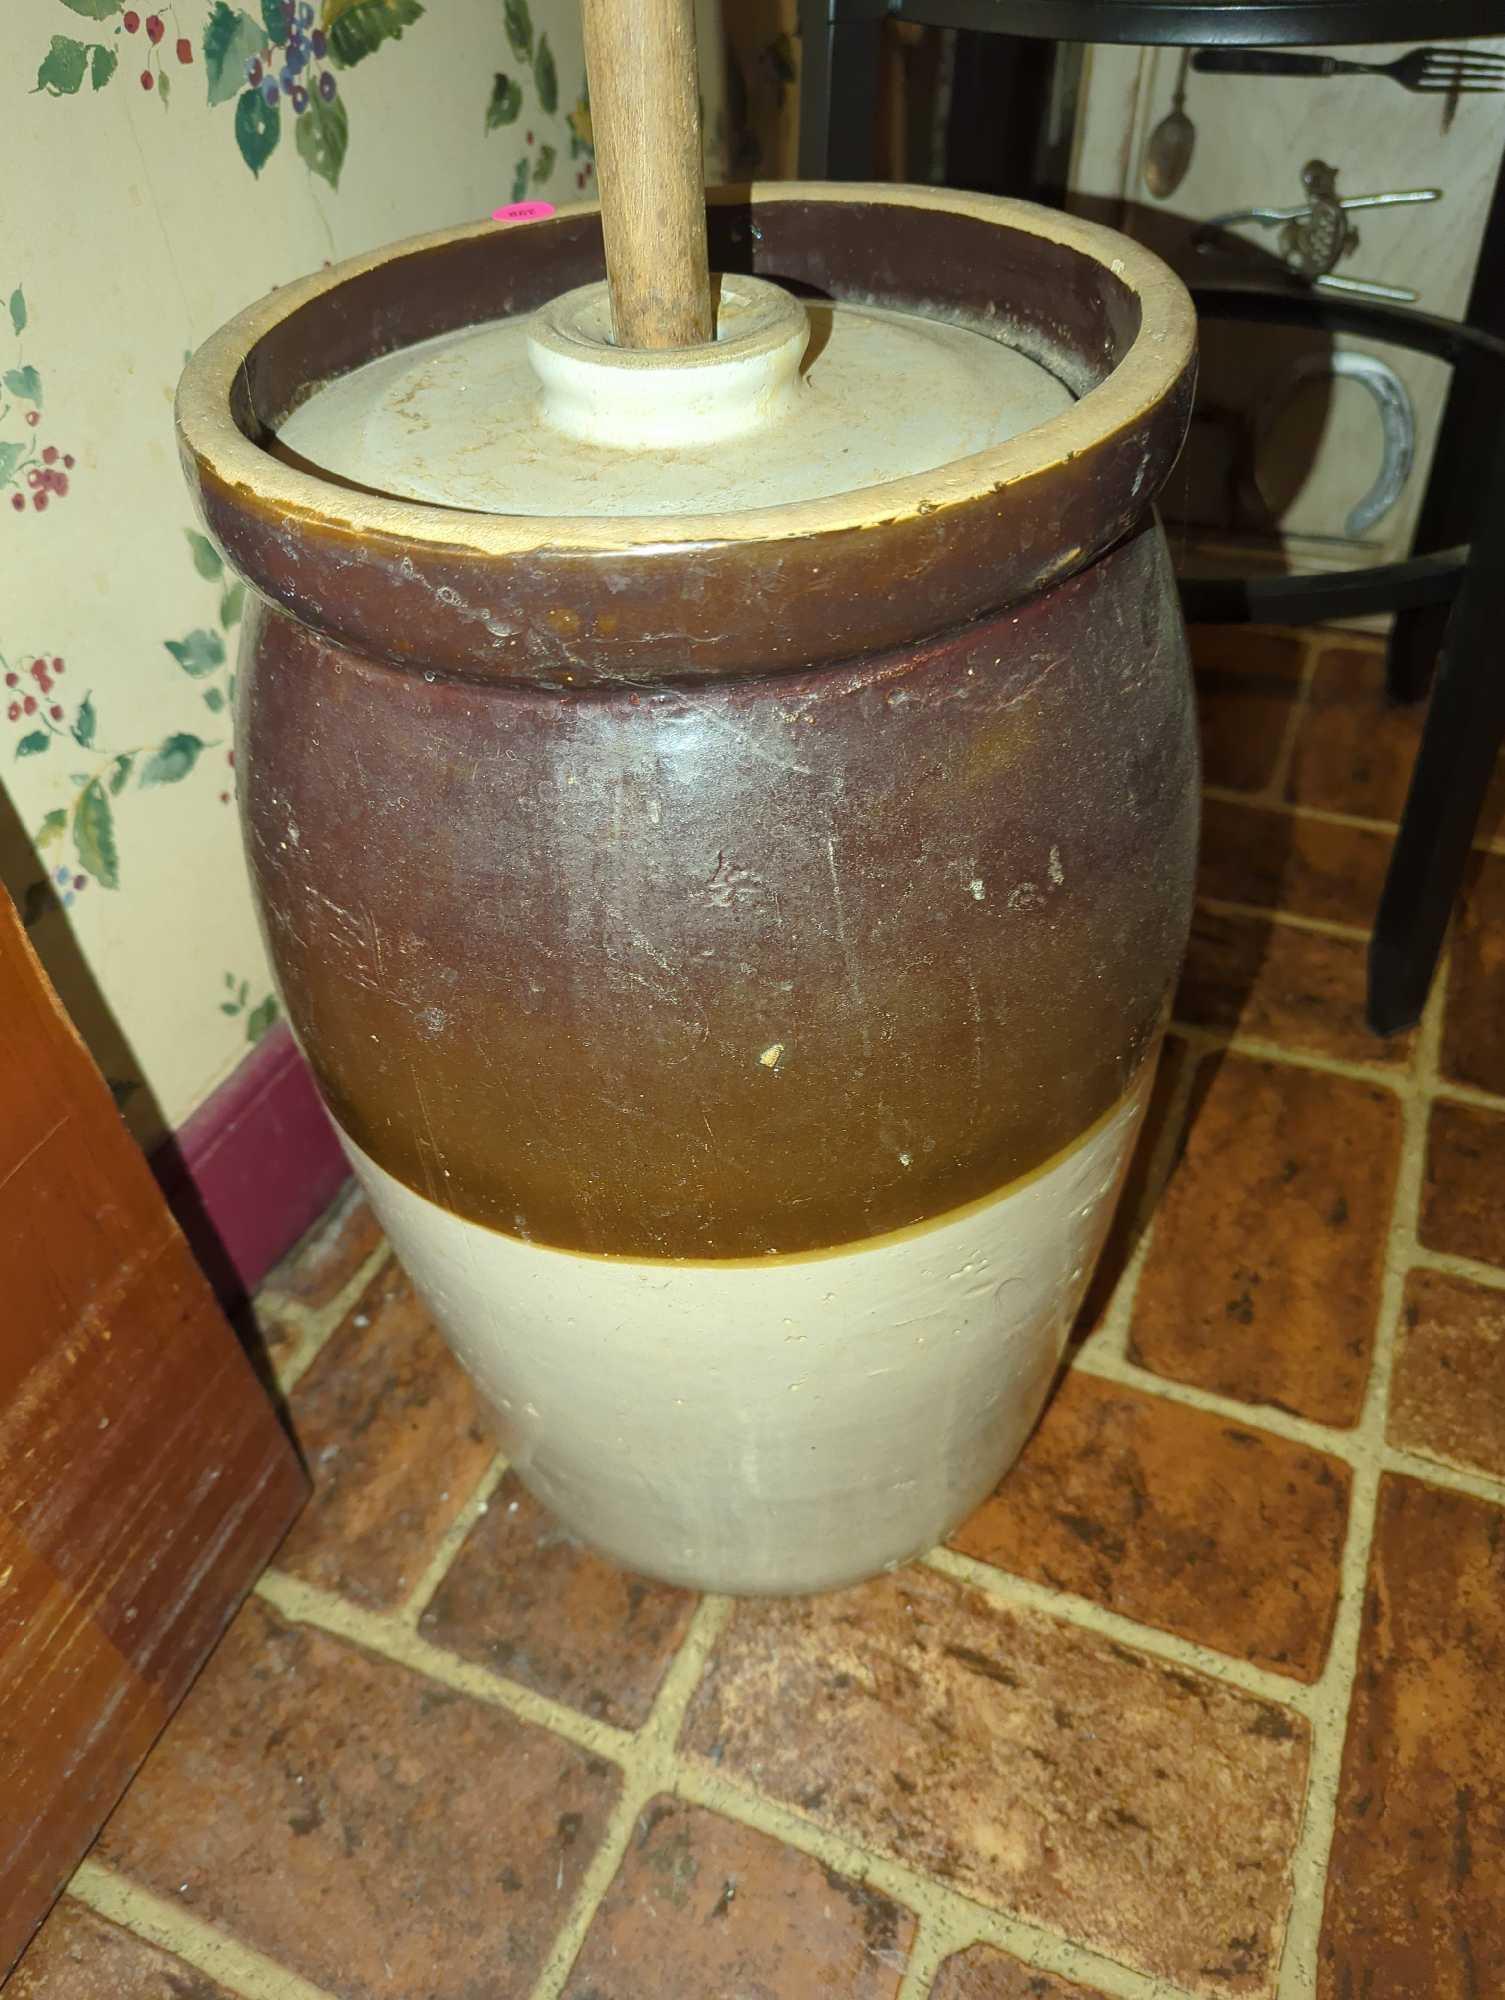 (KIT) ANTIQUE 6 GALLON BUTTER CHURN WITH ORIGINAL LID AND CHURN, MEASURE APPROXIMATELY 10 IN X 18